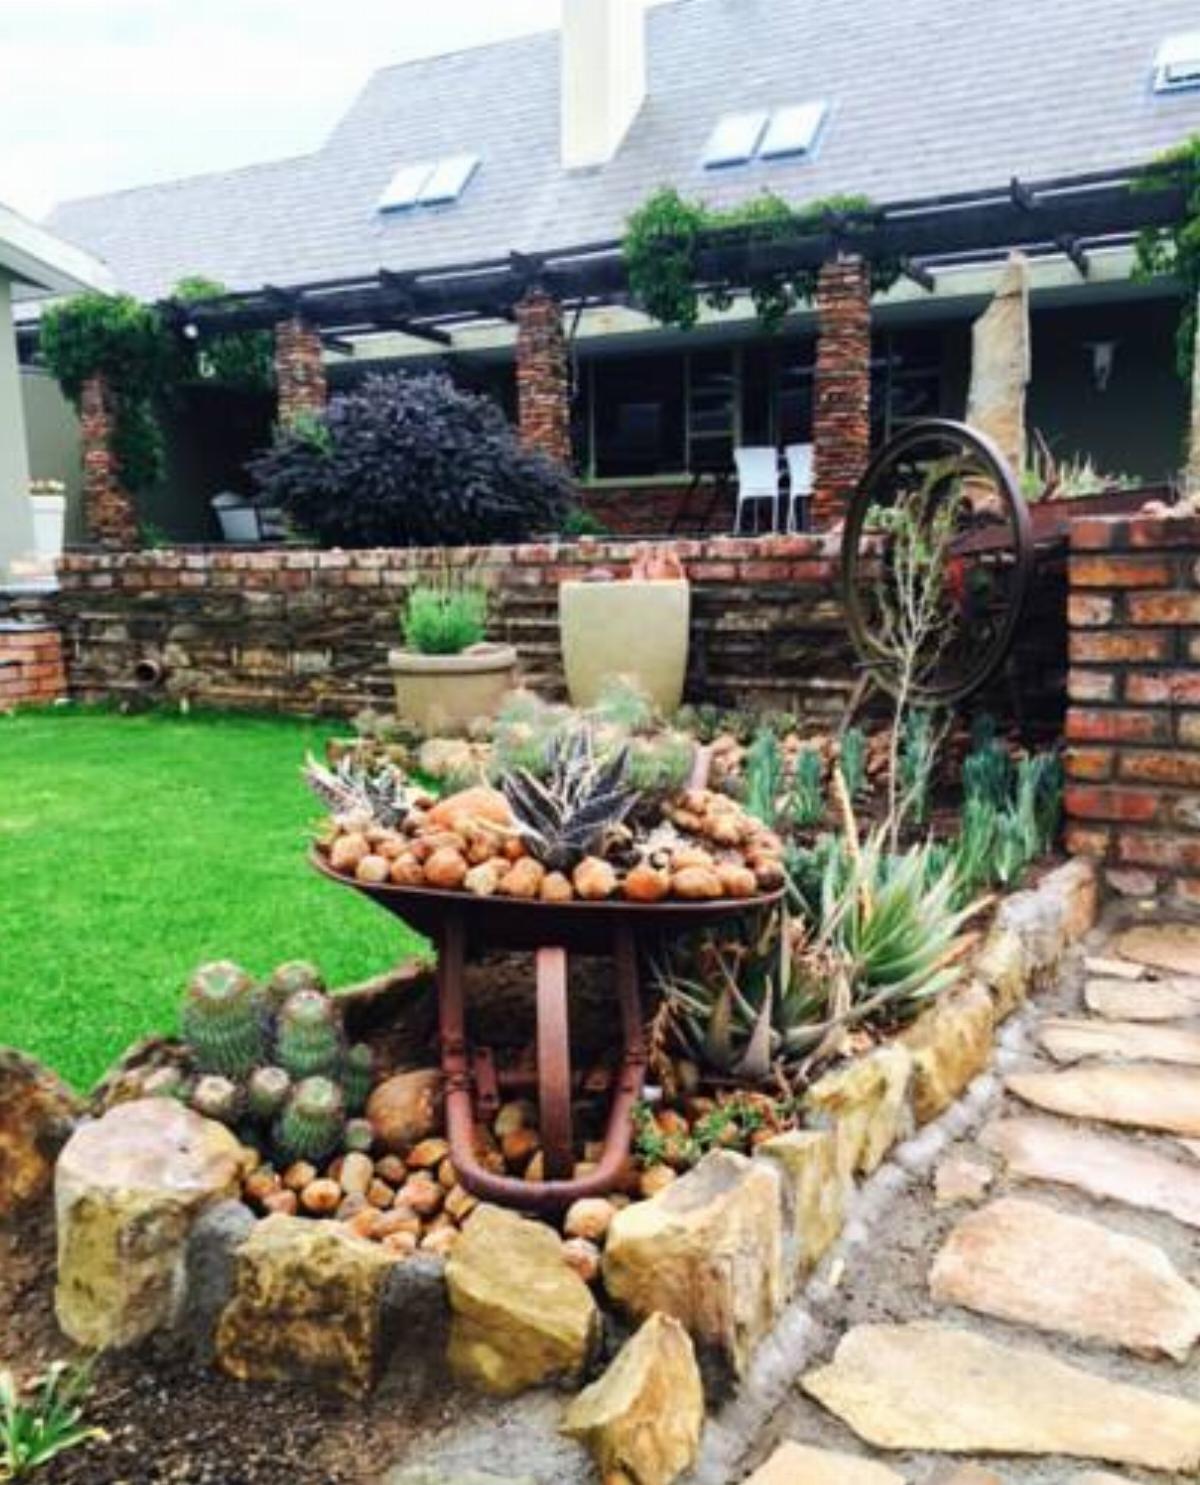 Desert Dew Guest House Hotel Hutchinson South Africa